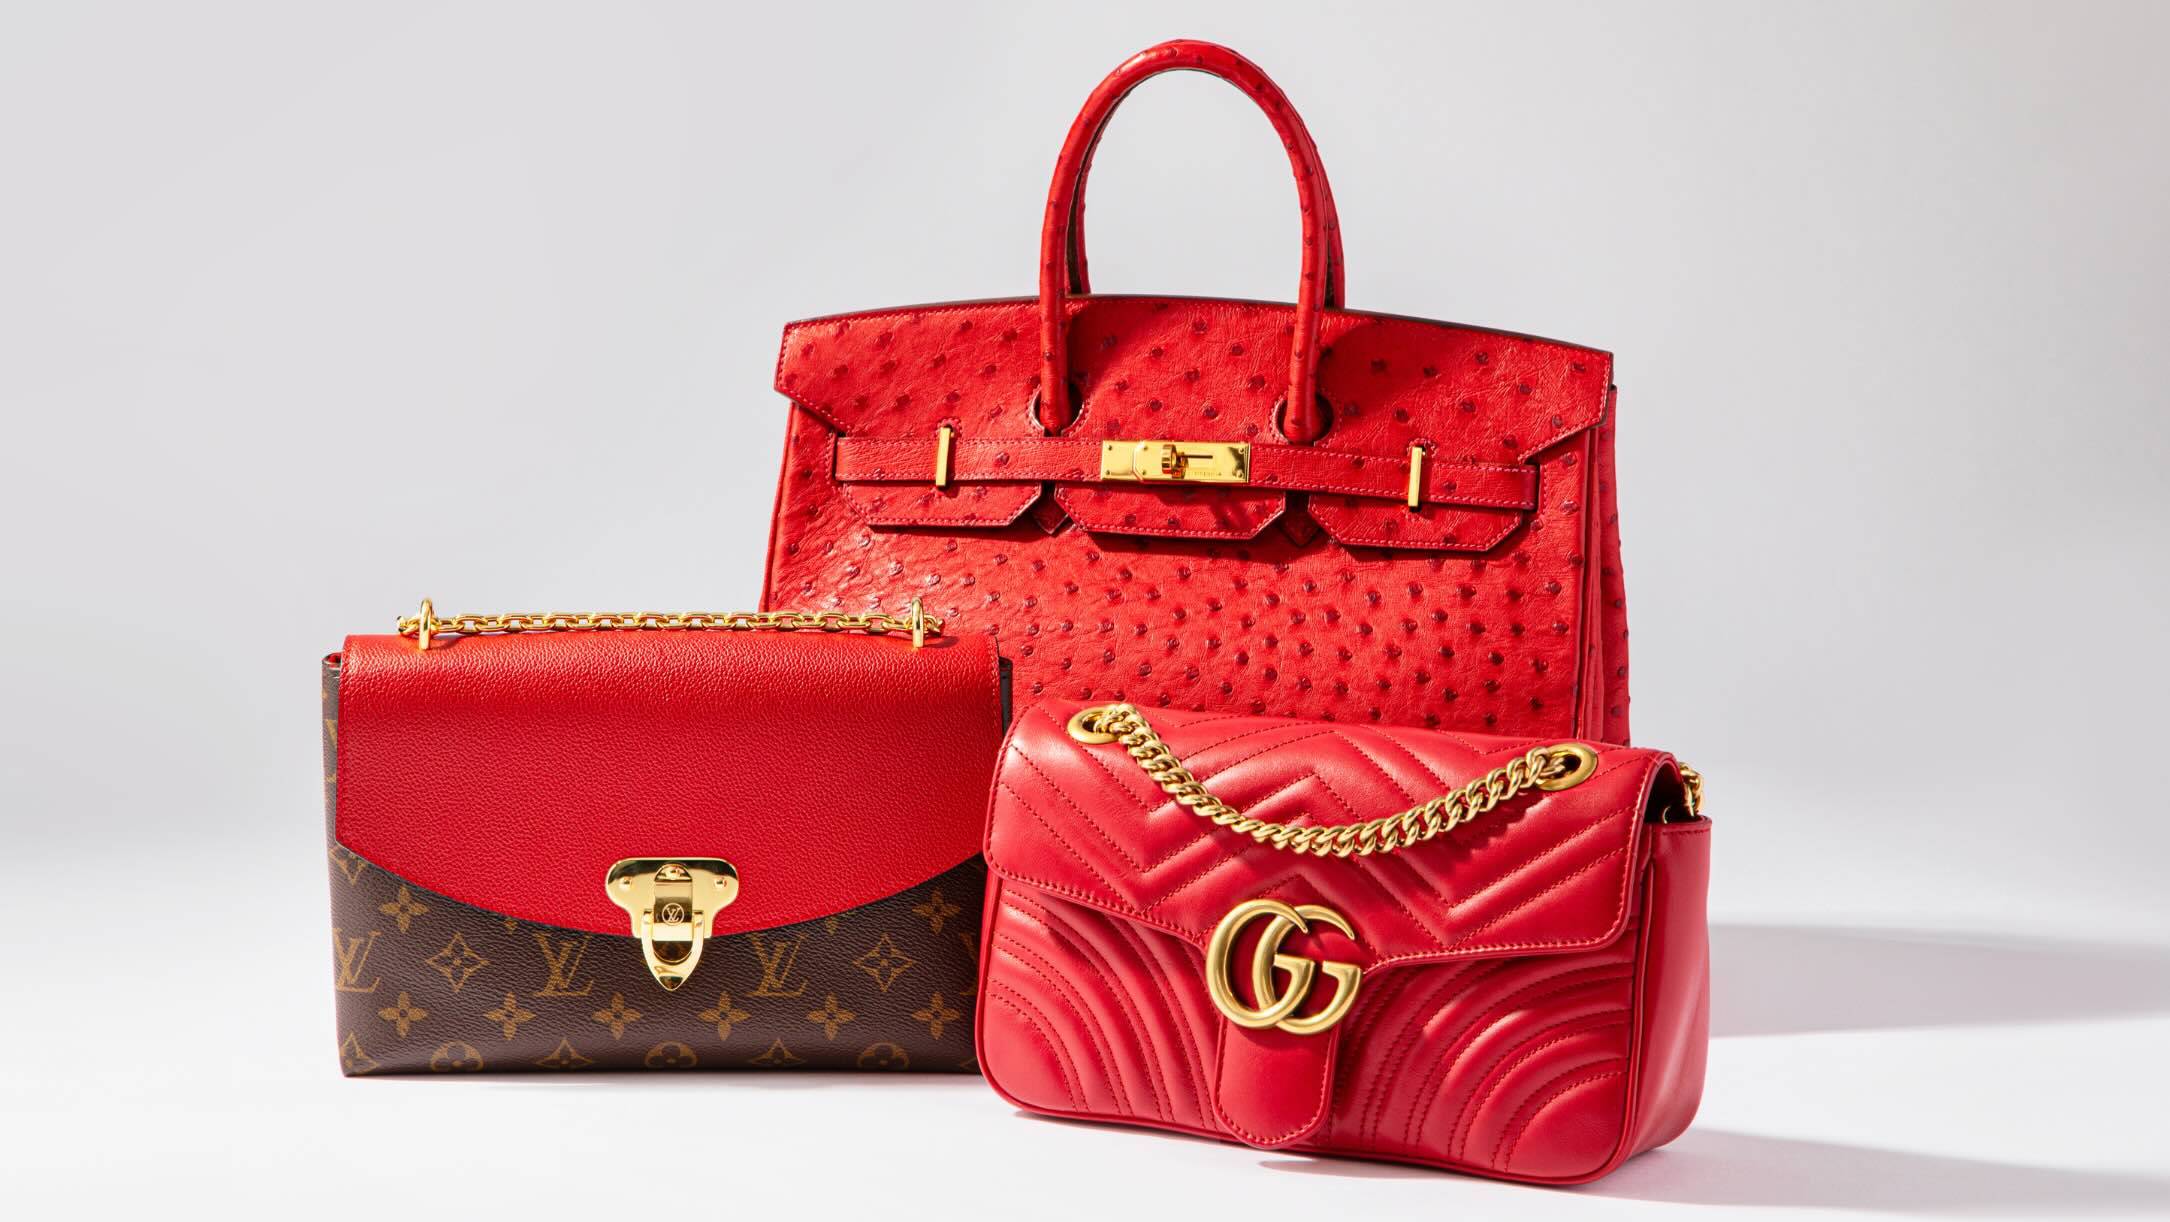 Designer Handbags on Sale: Discounted Luxury Bags | The Daily Dish